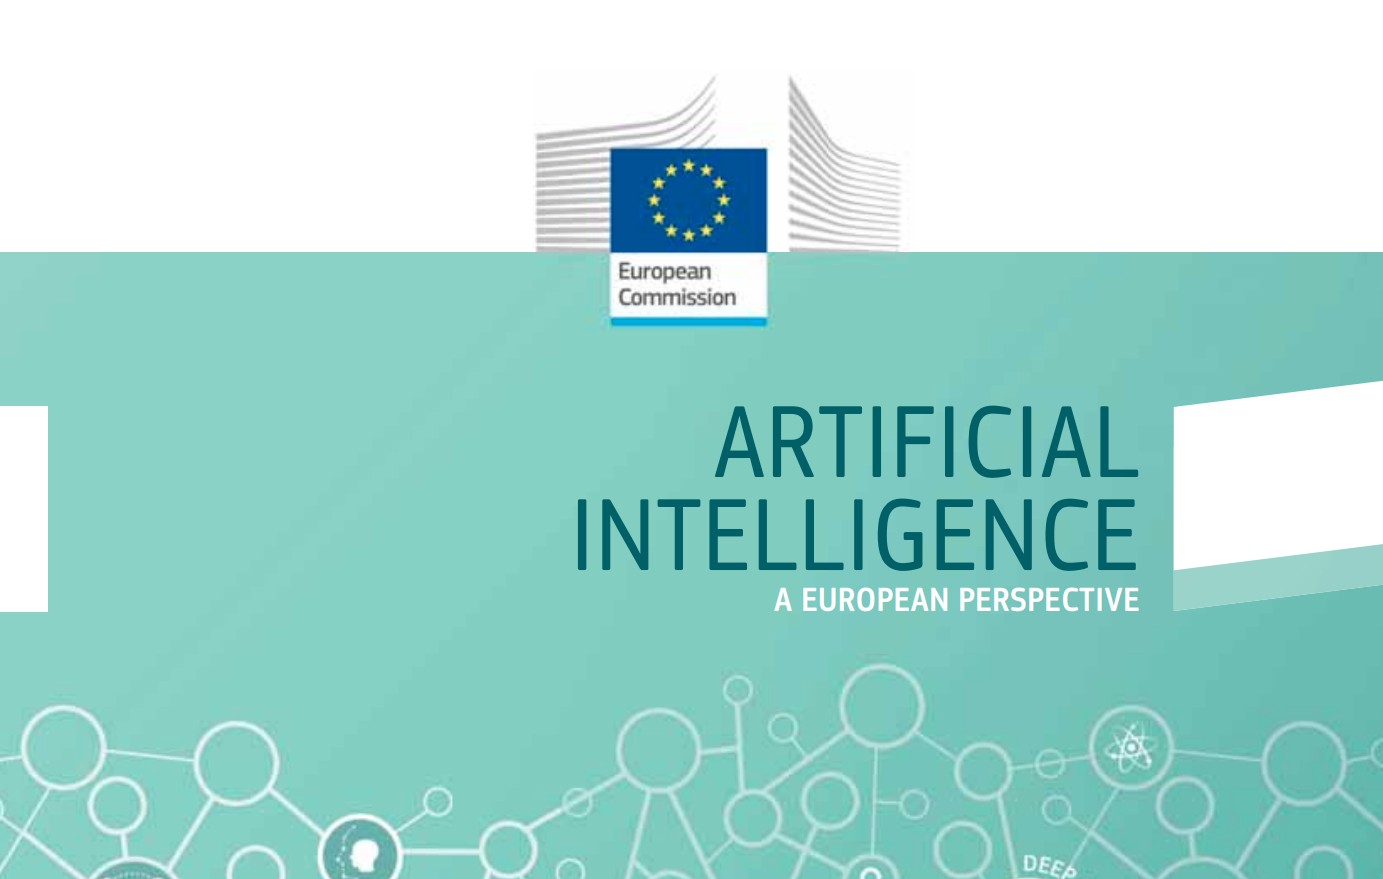 A critique of the European Commission's white paper on AI